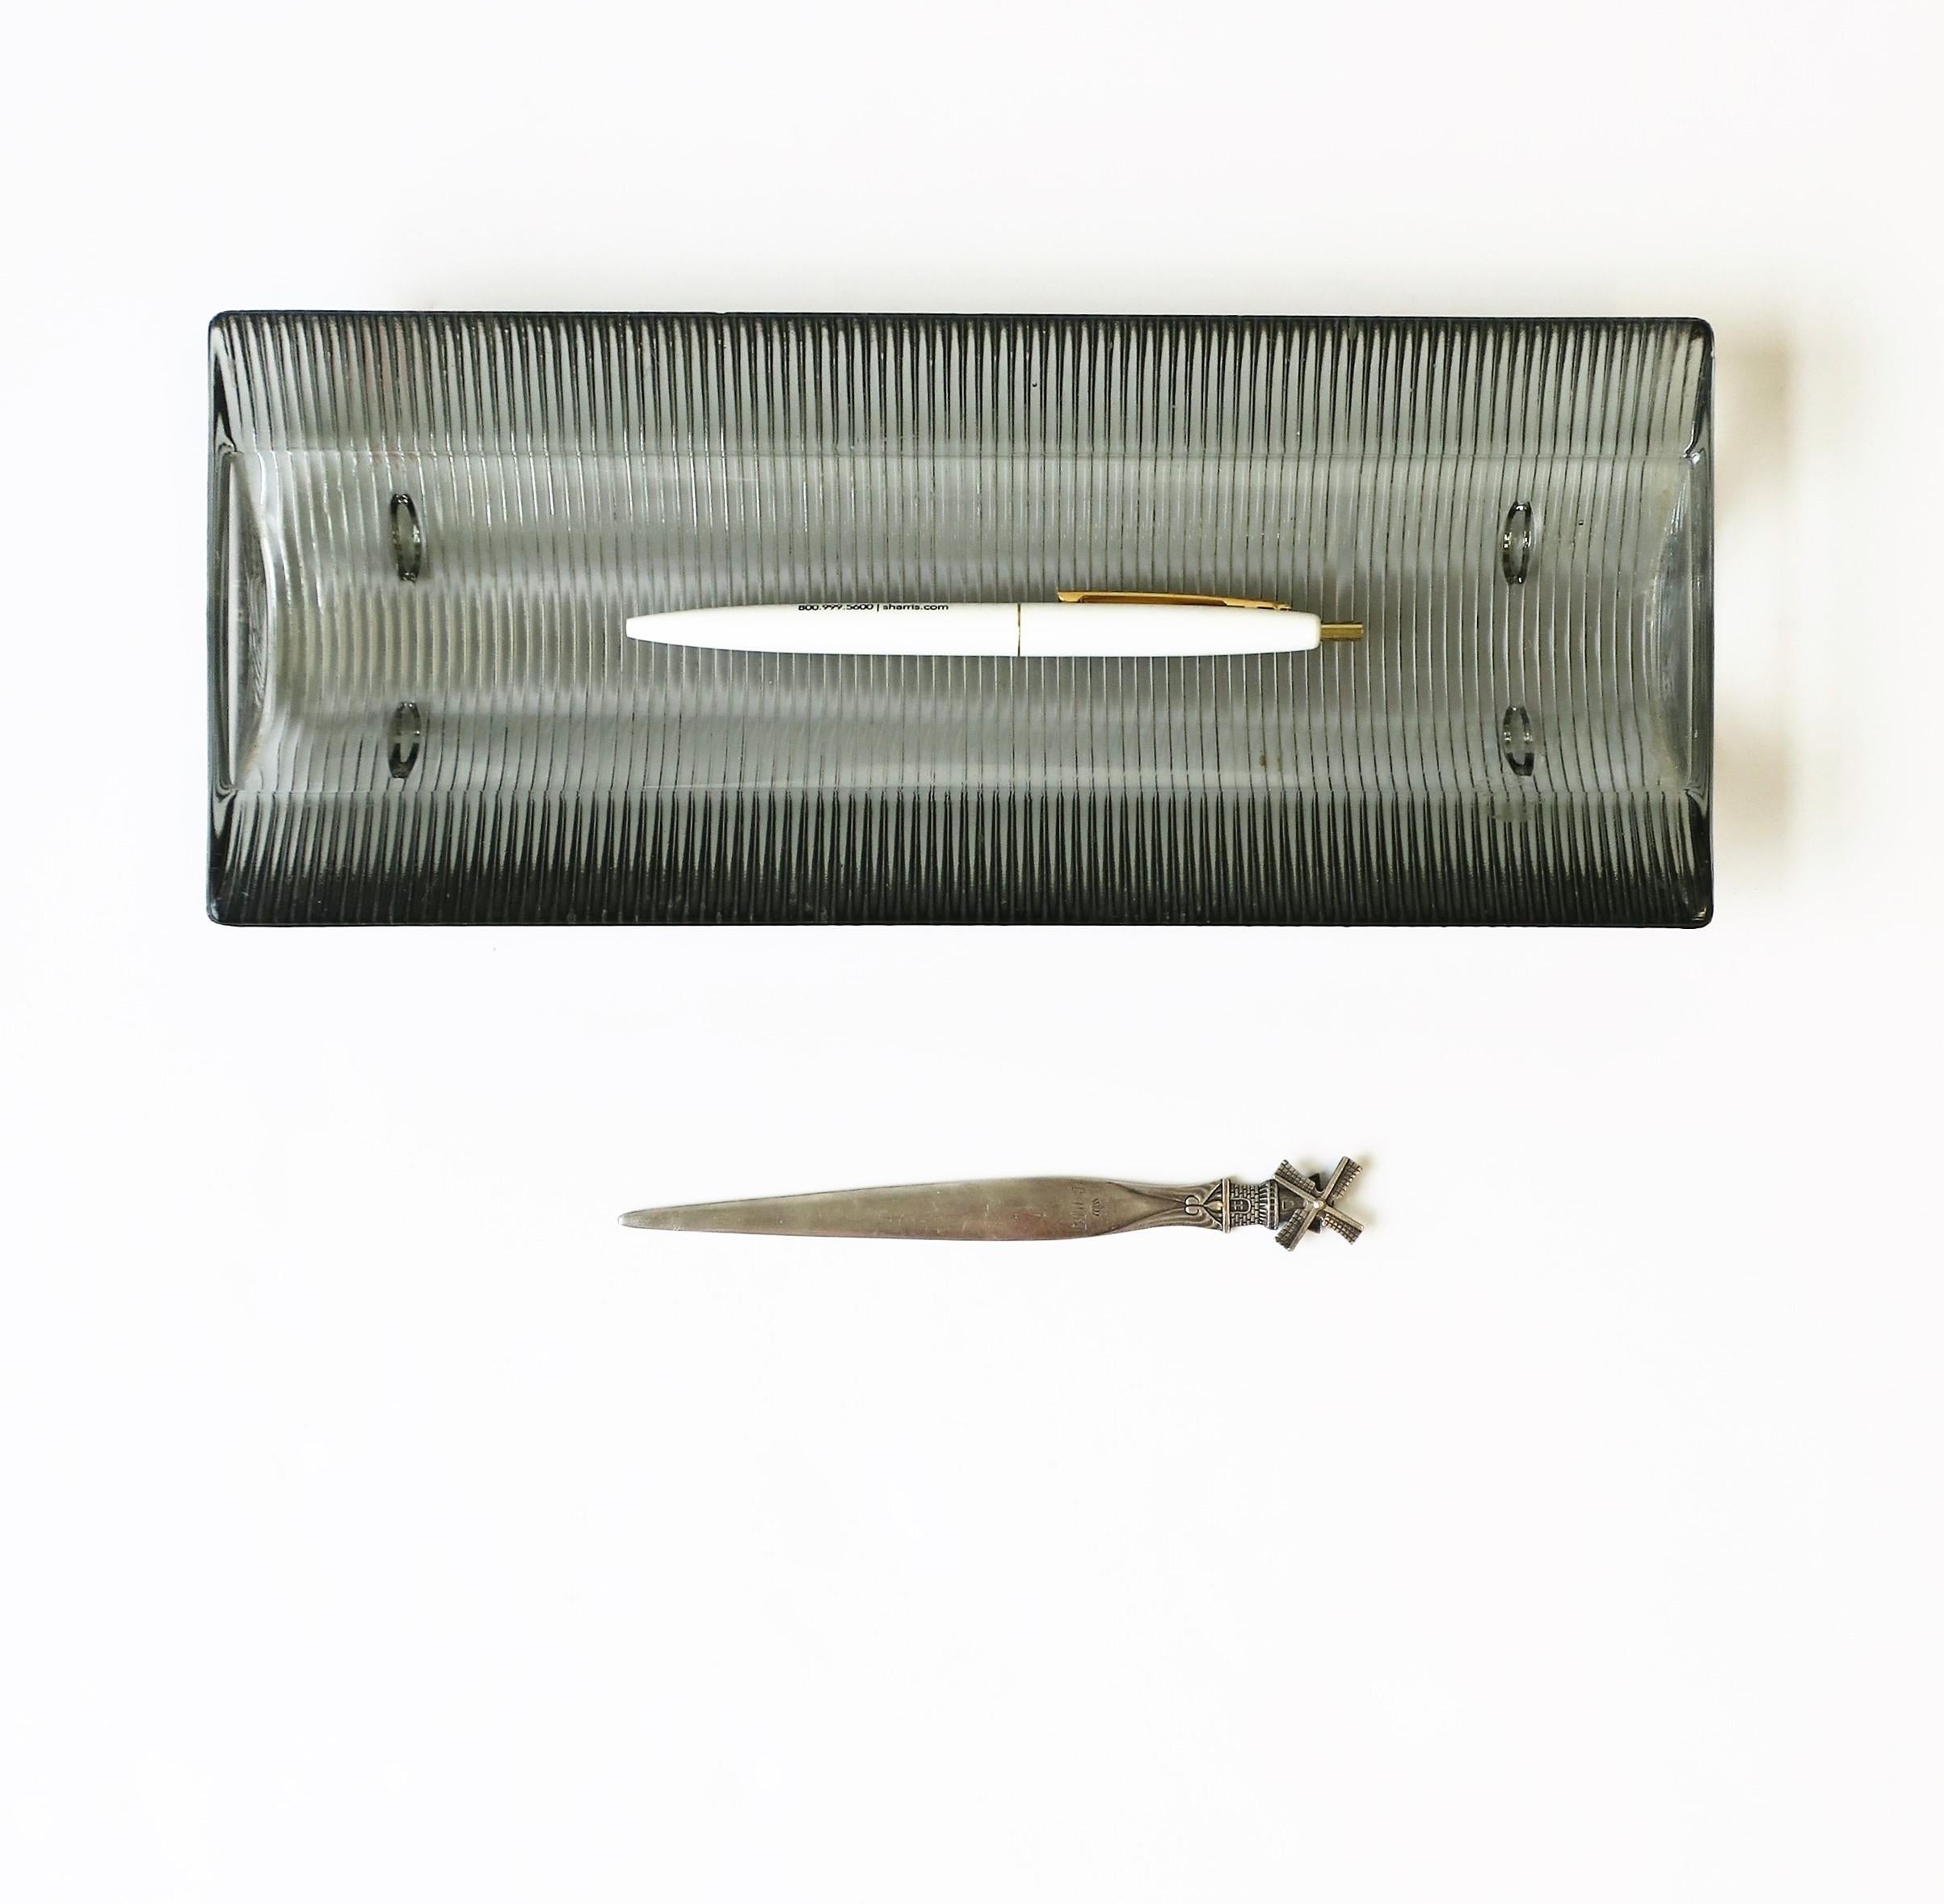  Art Nouveau Sterling Silver Plate Windmill Letter Opener for KLM Airlines In Good Condition For Sale In New York, NY